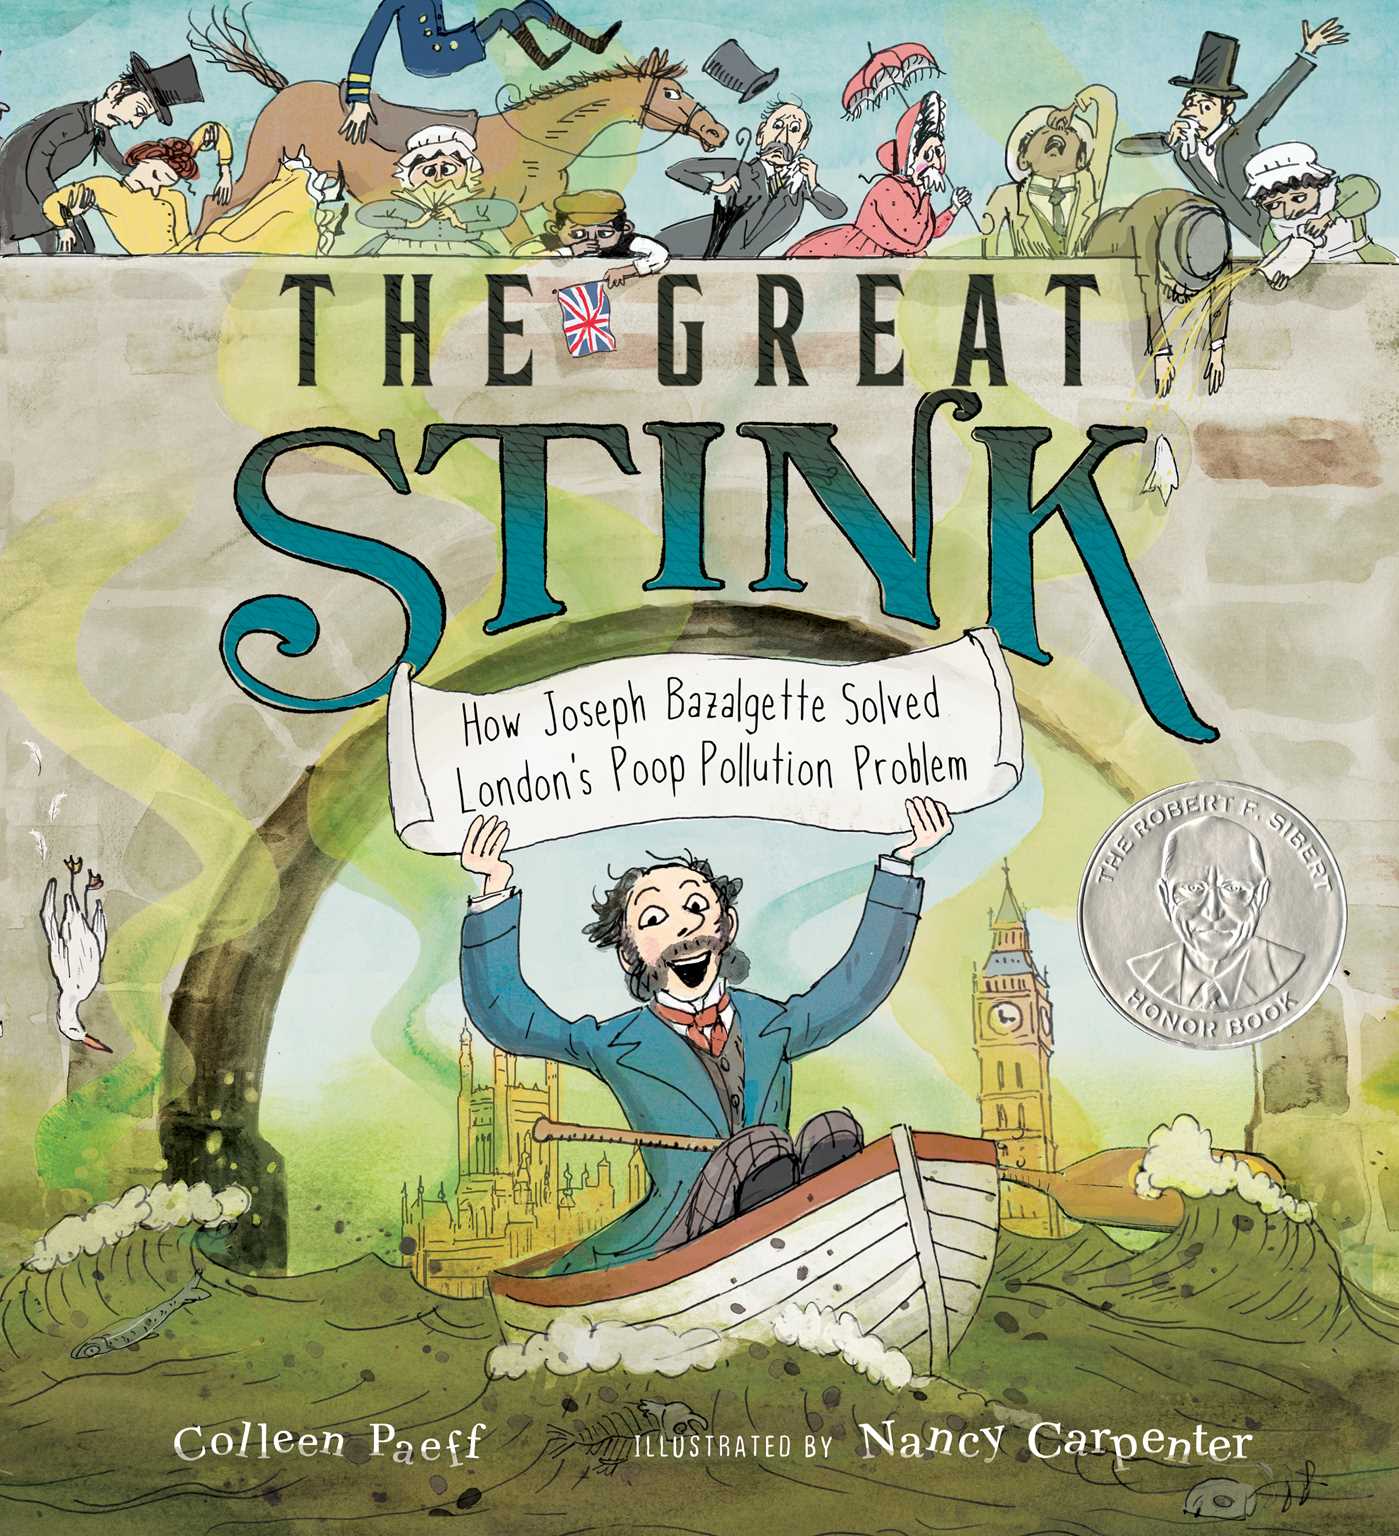 The Great Stink How Joseph Bazalgette Solved London's Poop Pollution Problem cover image